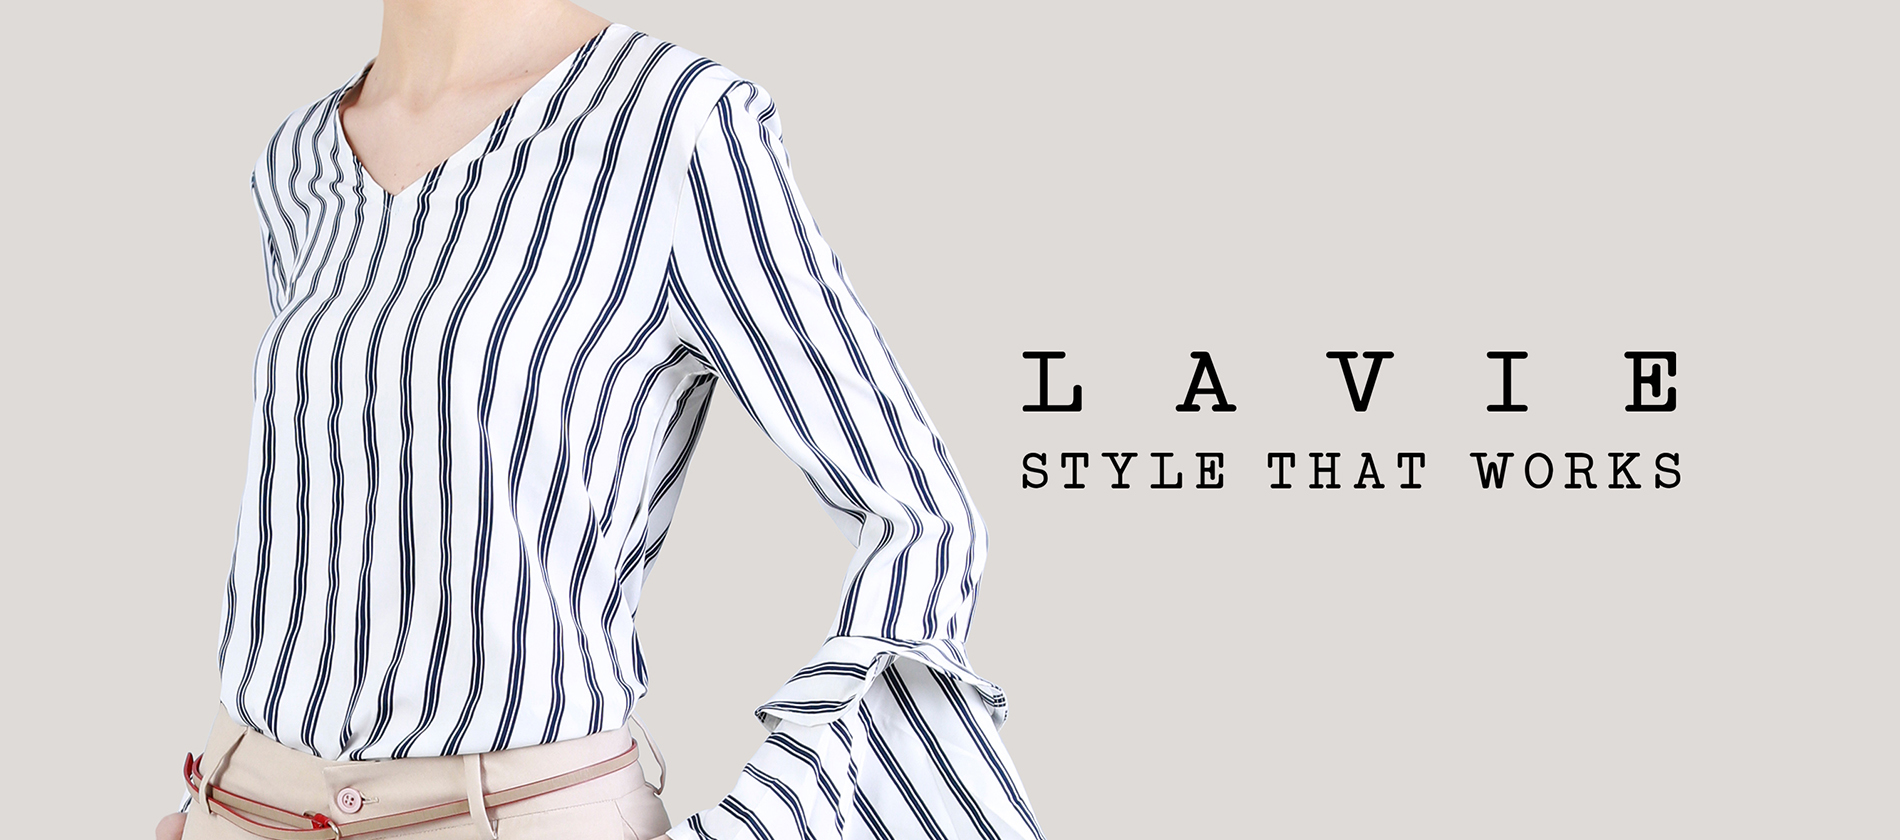 LA VIE : Boasts of a corporate-inclined, polished aesthetic. The 